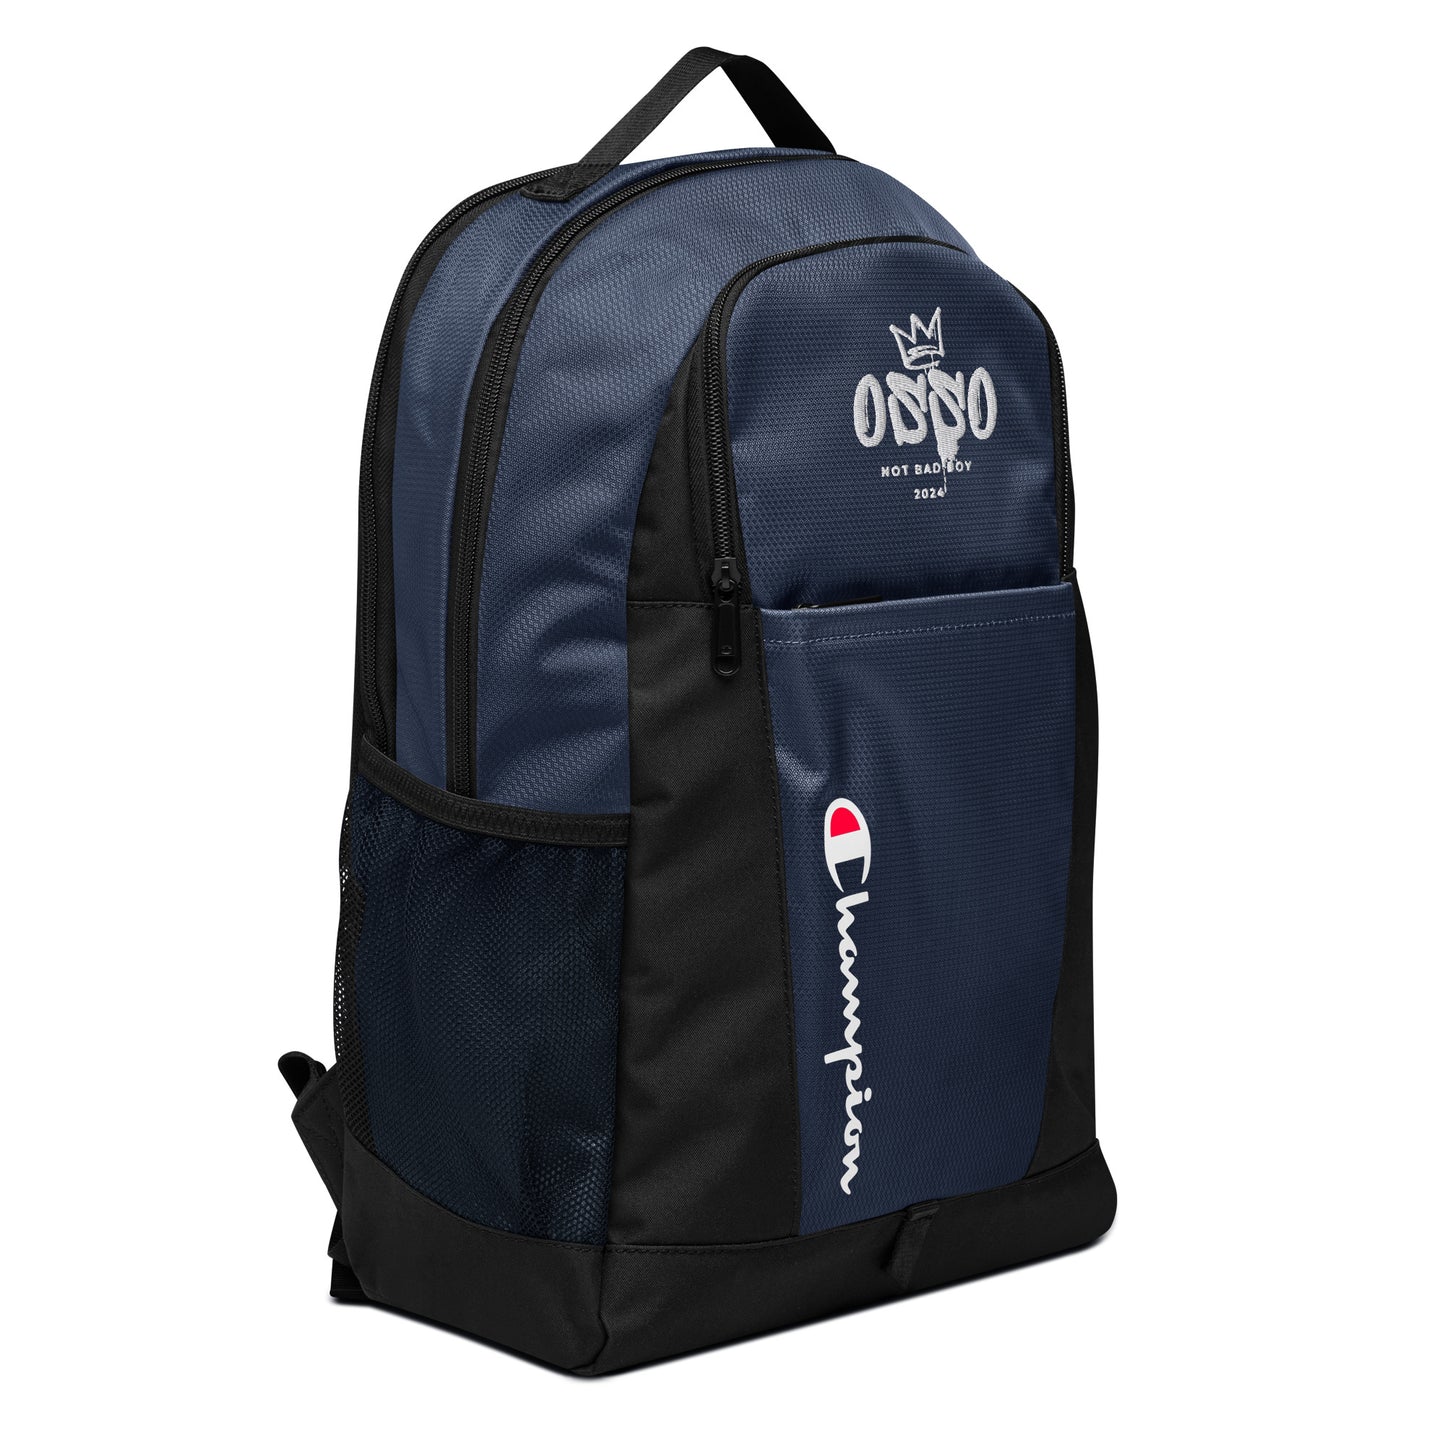 Champion backpack